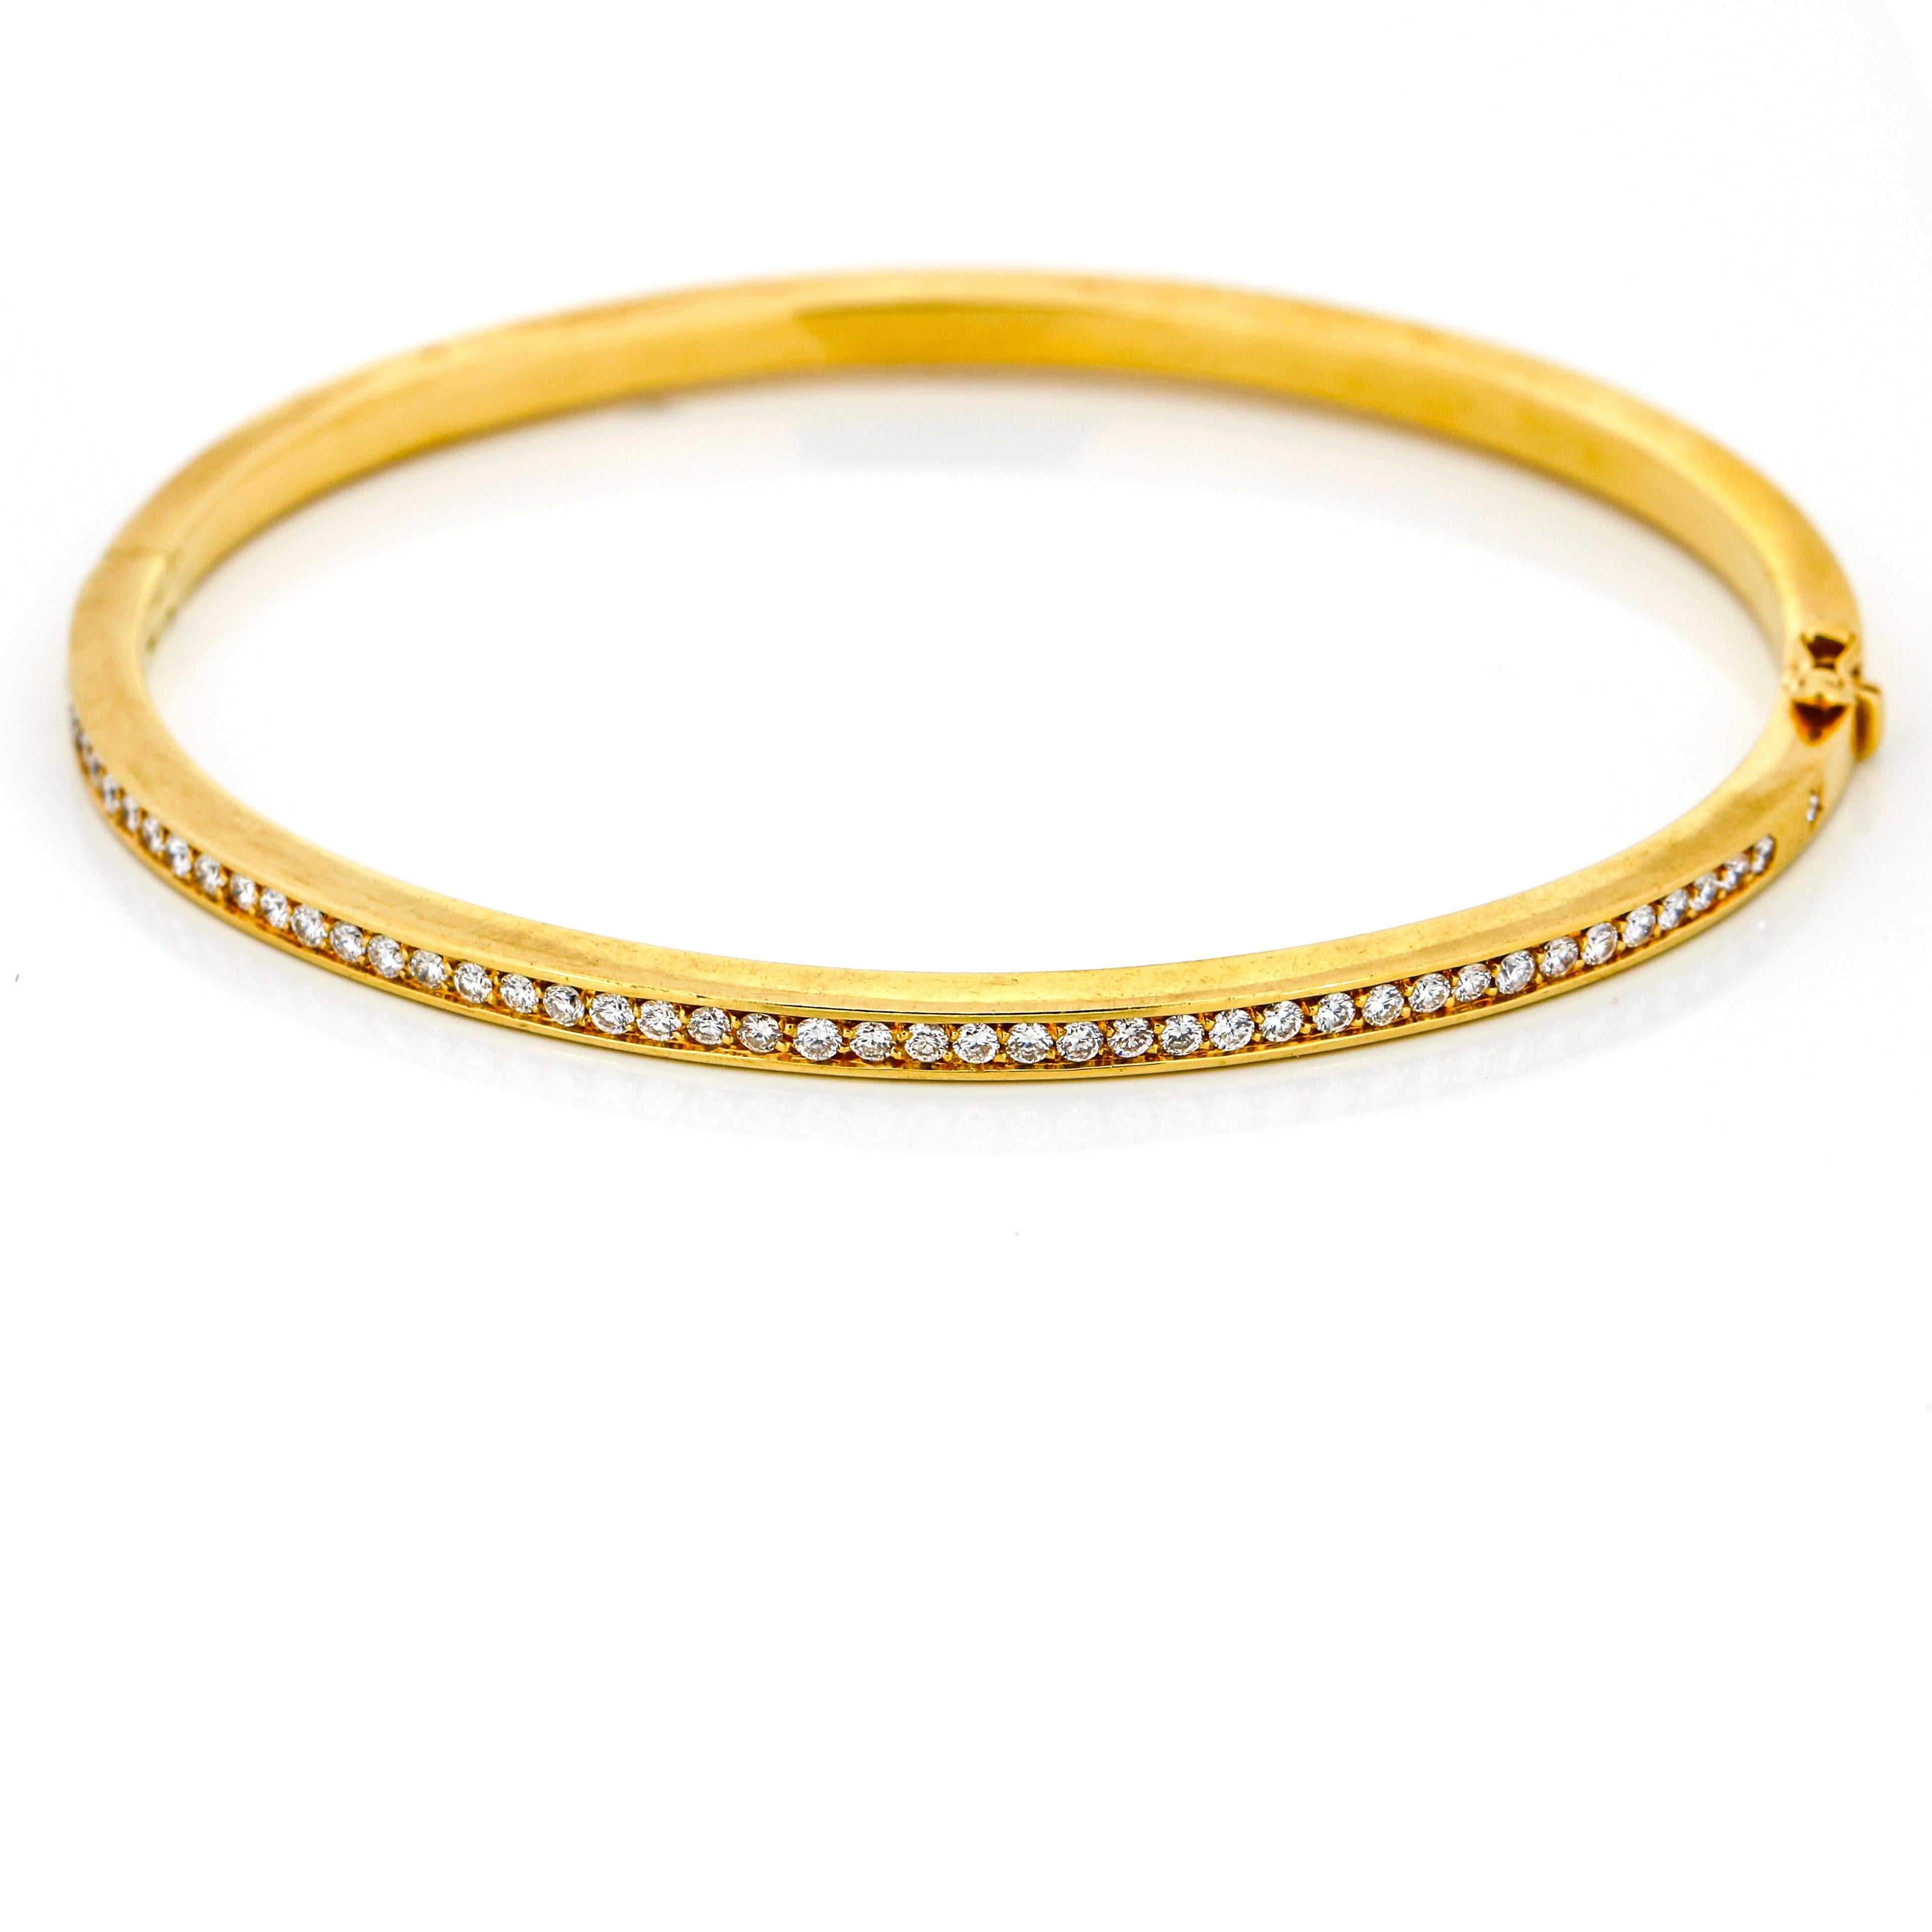 H. Stern 1.00 Carat 18 Karat Yellow Gold Diamond Bangle Bracelet In Excellent Condition For Sale In Fort Lauderdale, FL